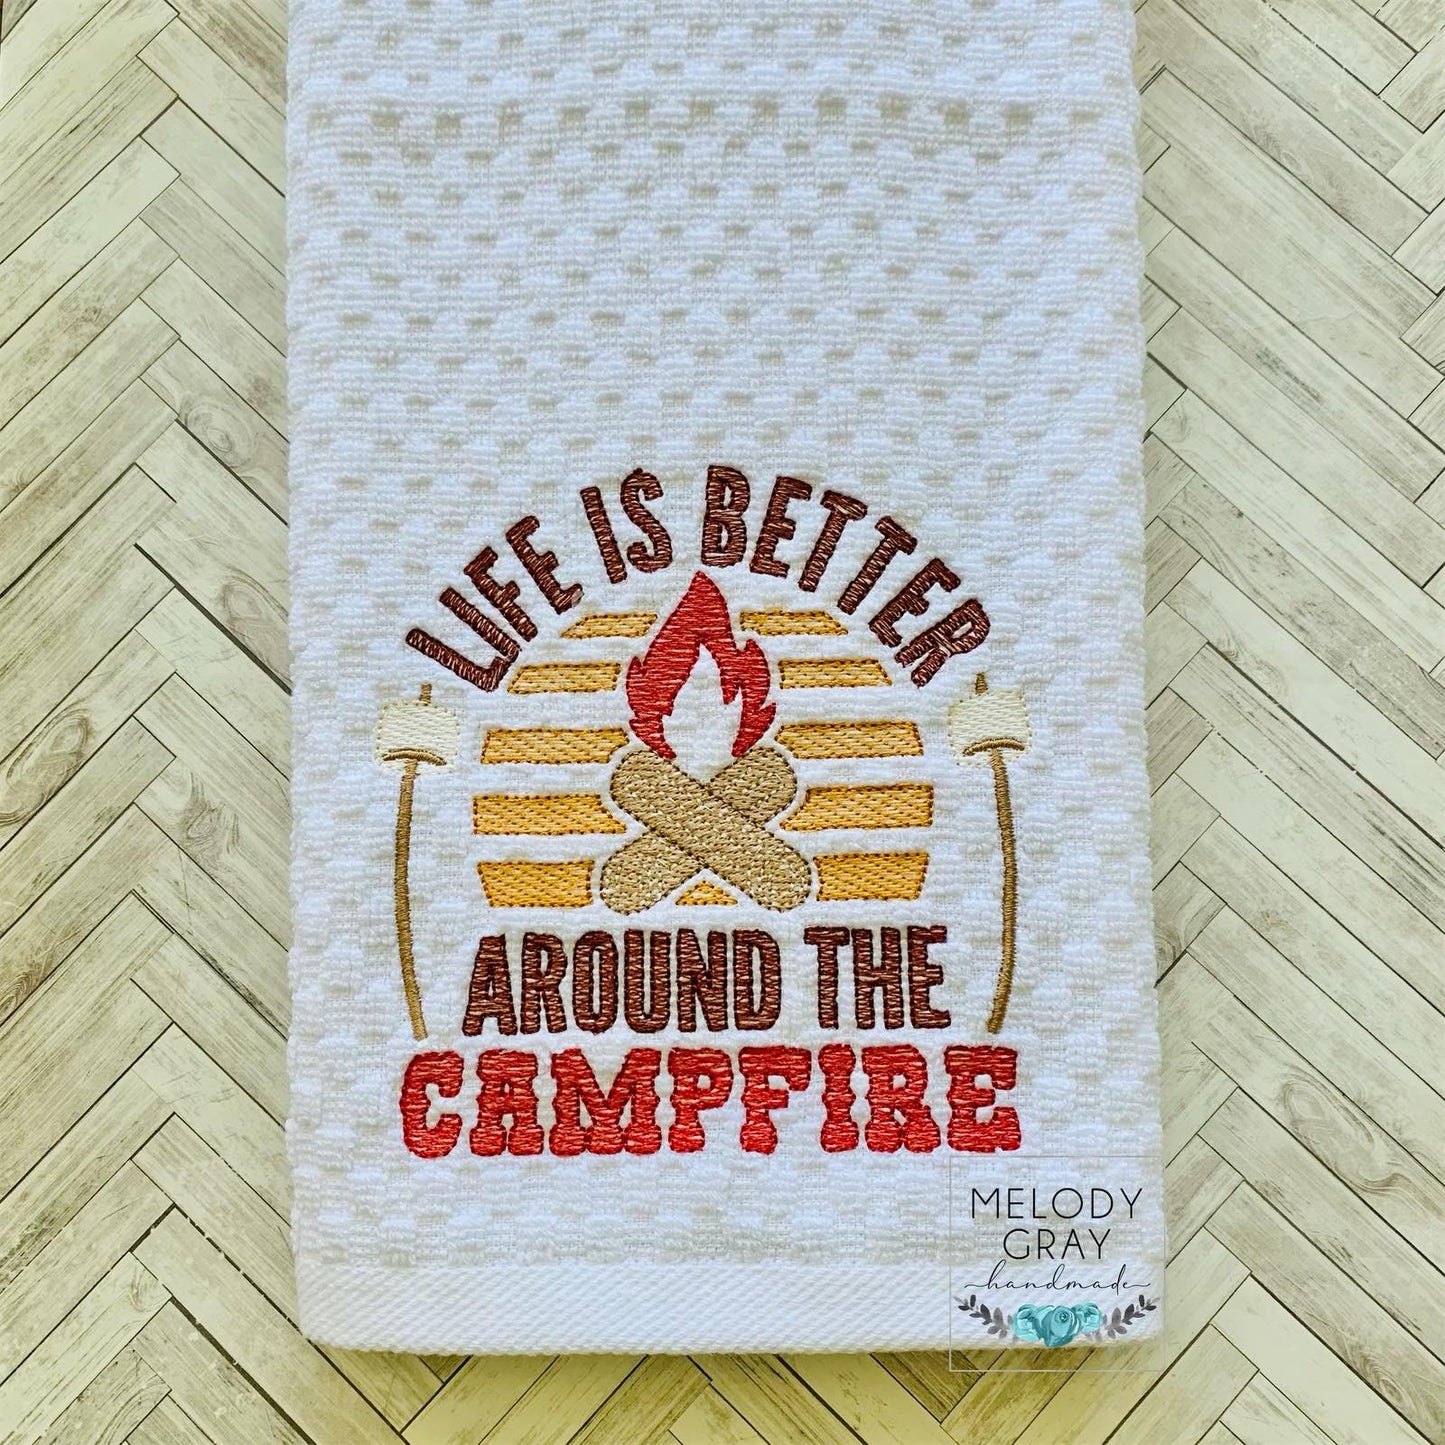 Life is better around the campfire - 2 sizes- Digital Embroidery Design